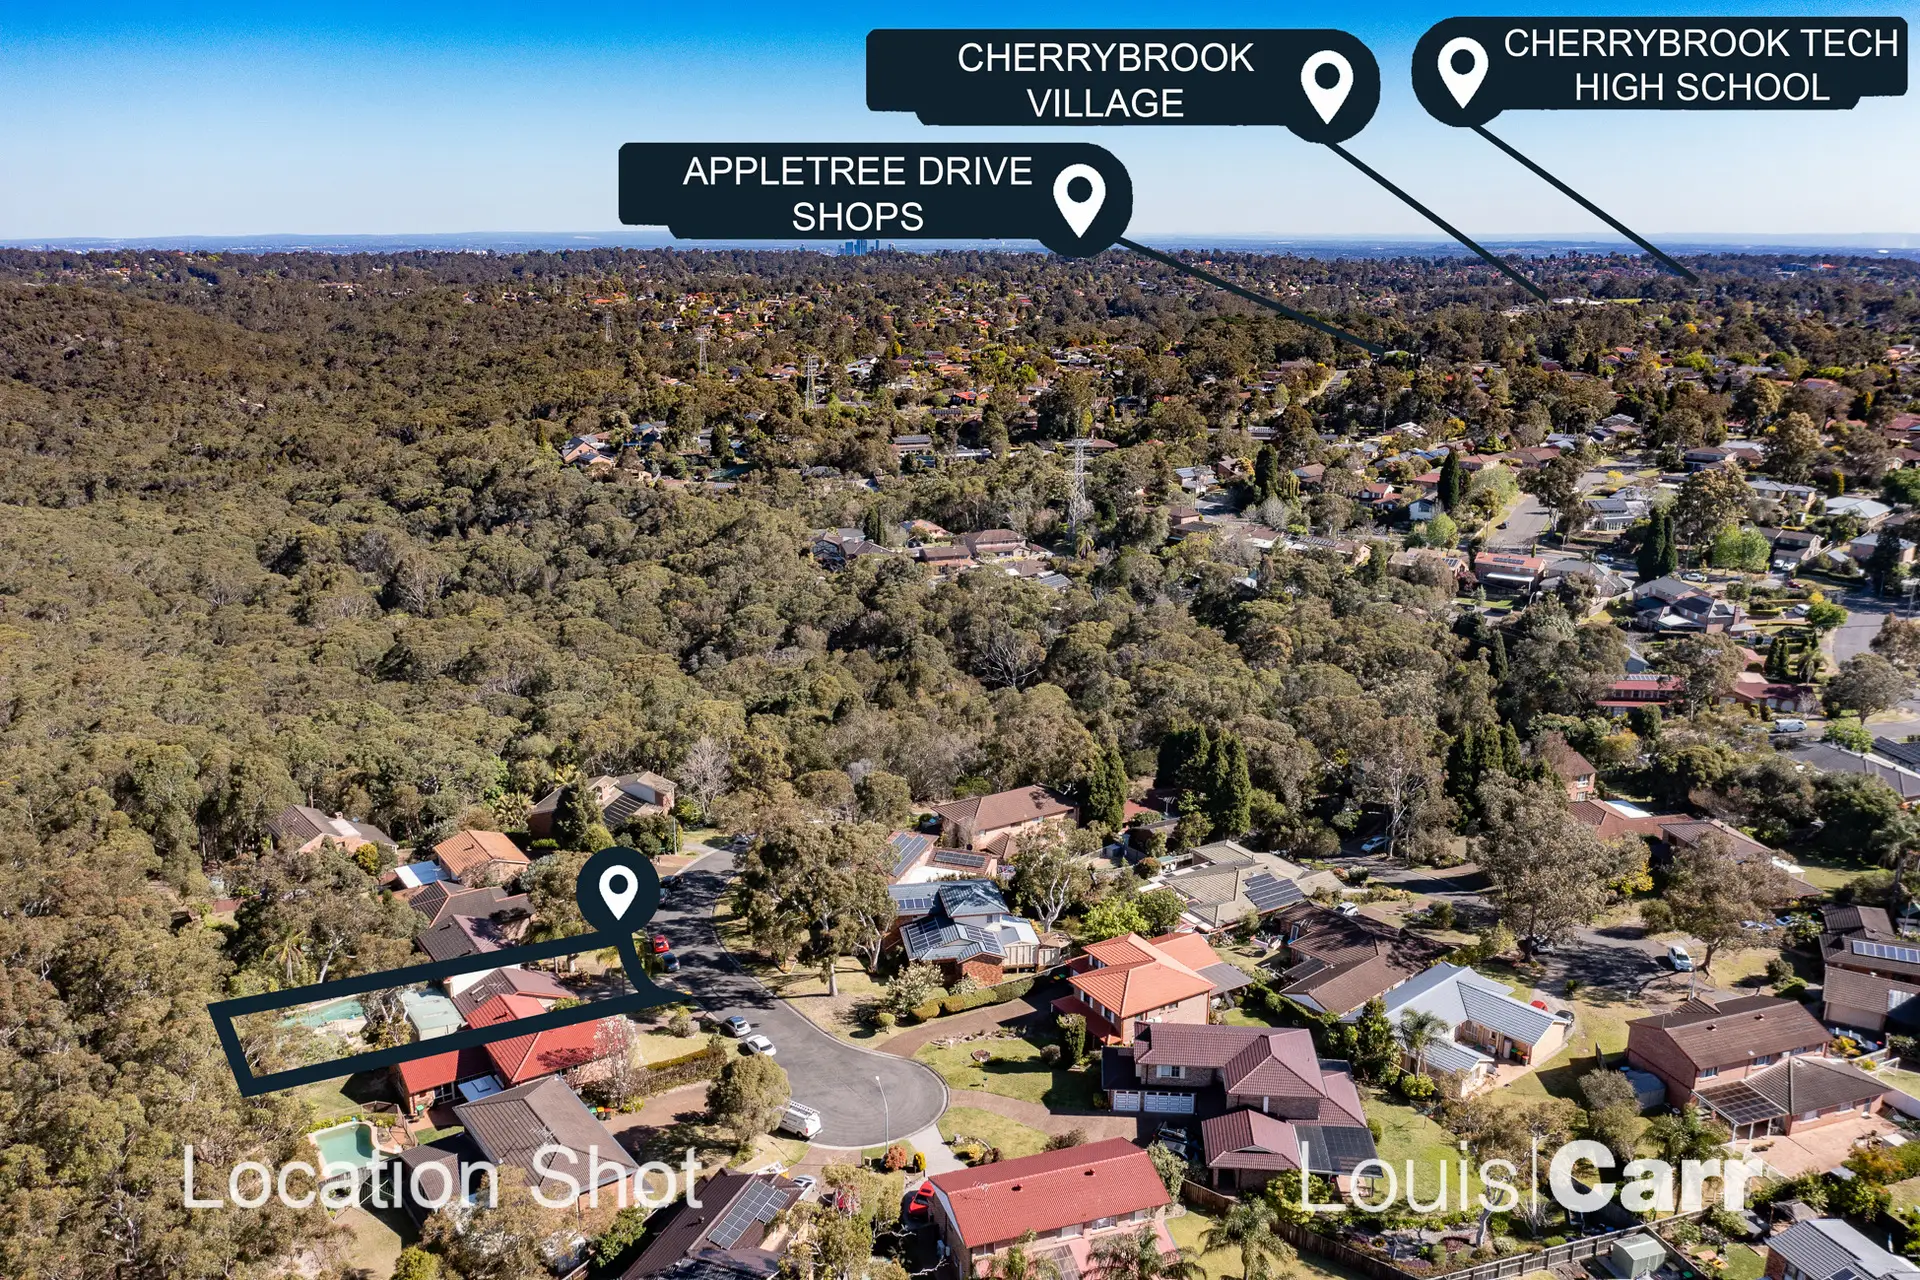 14 Patricia Place, Cherrybrook Sold by Louis Carr Real Estate - image 1